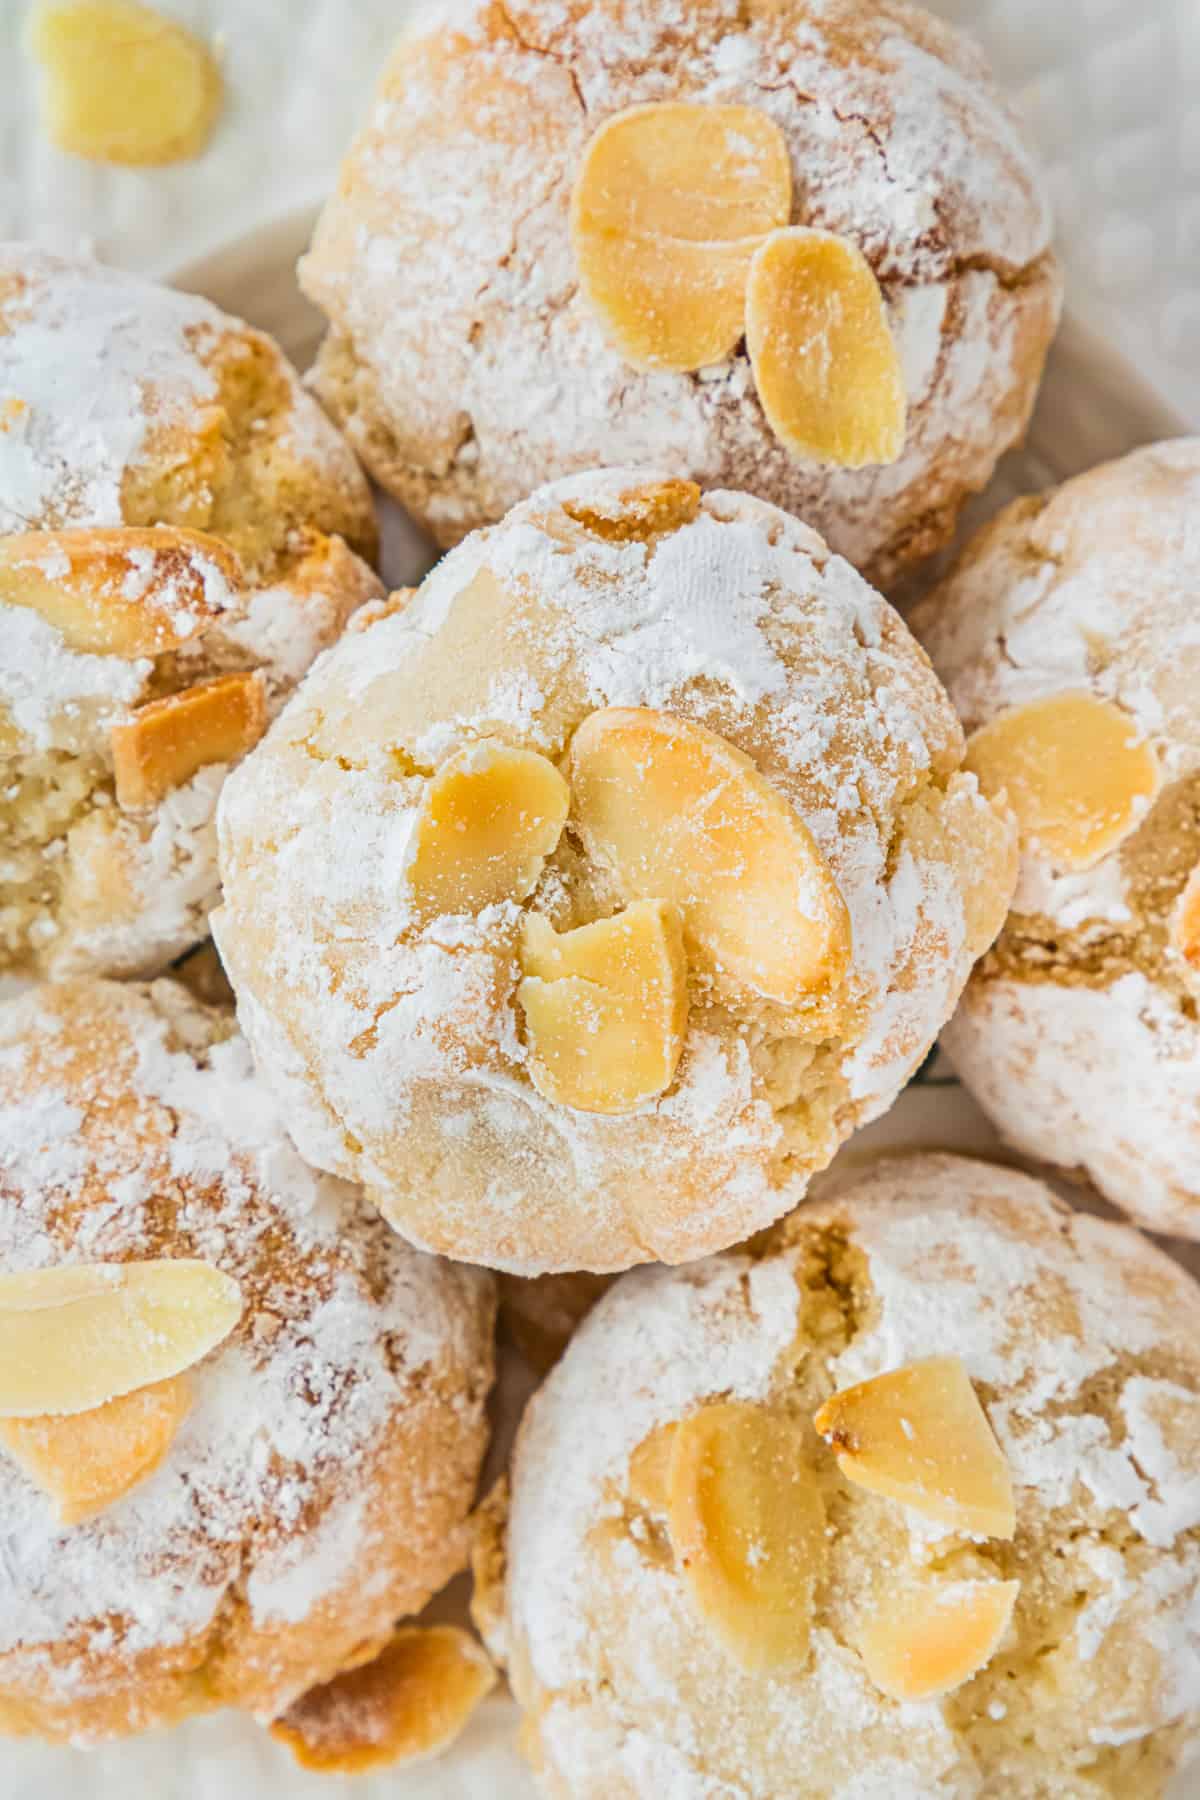 Italian Amaretti Cookies rolled in confectioners sugar and topped with flaked almonds